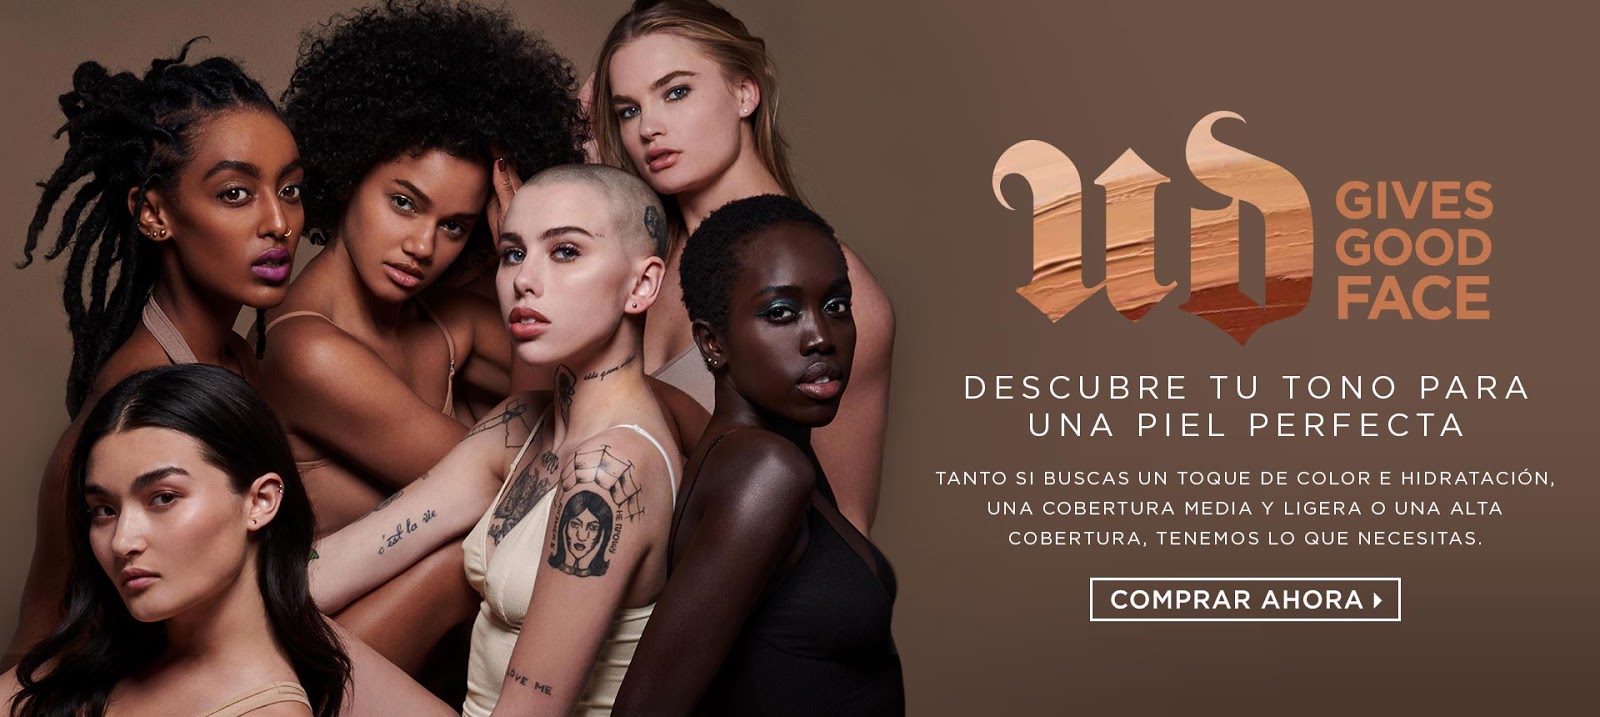 Fitness And Chicness-FF Urban Decay-Portada